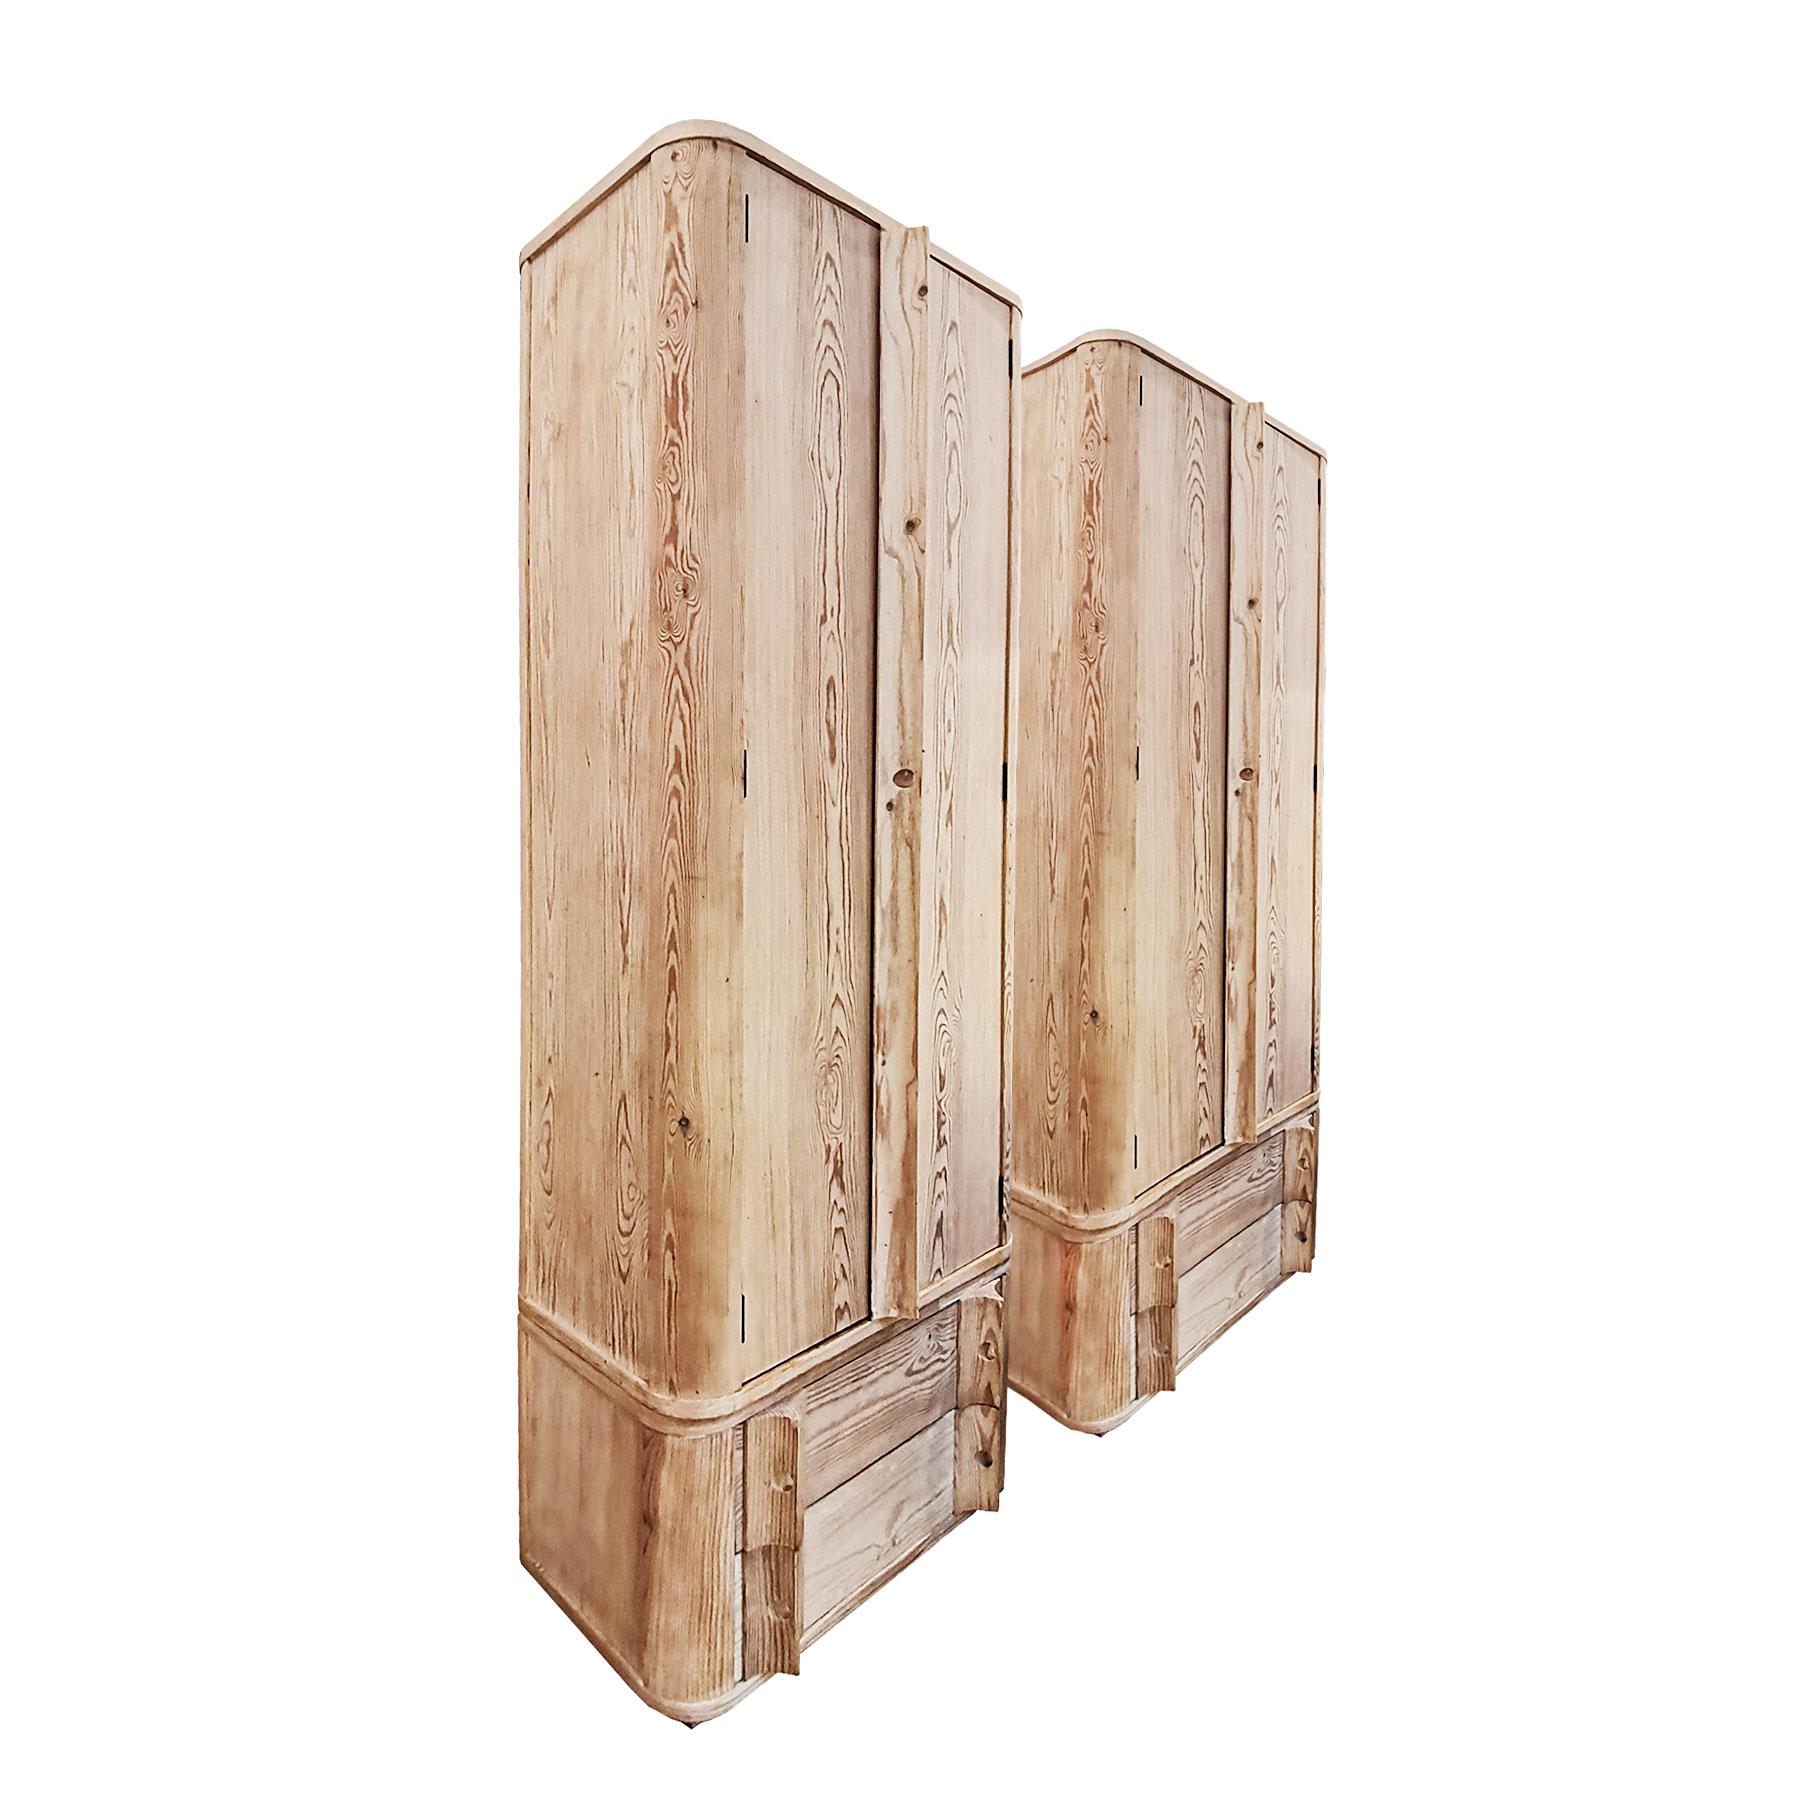 Pair of modular wardrobes in white pitch pine wood, one base block with two drawers (could be put on top) and one main block with two doors with shelf and a hanging bar.
Design: Jordi Vilanova
Spain, Barcelona, circa 1970

Measures: Base block